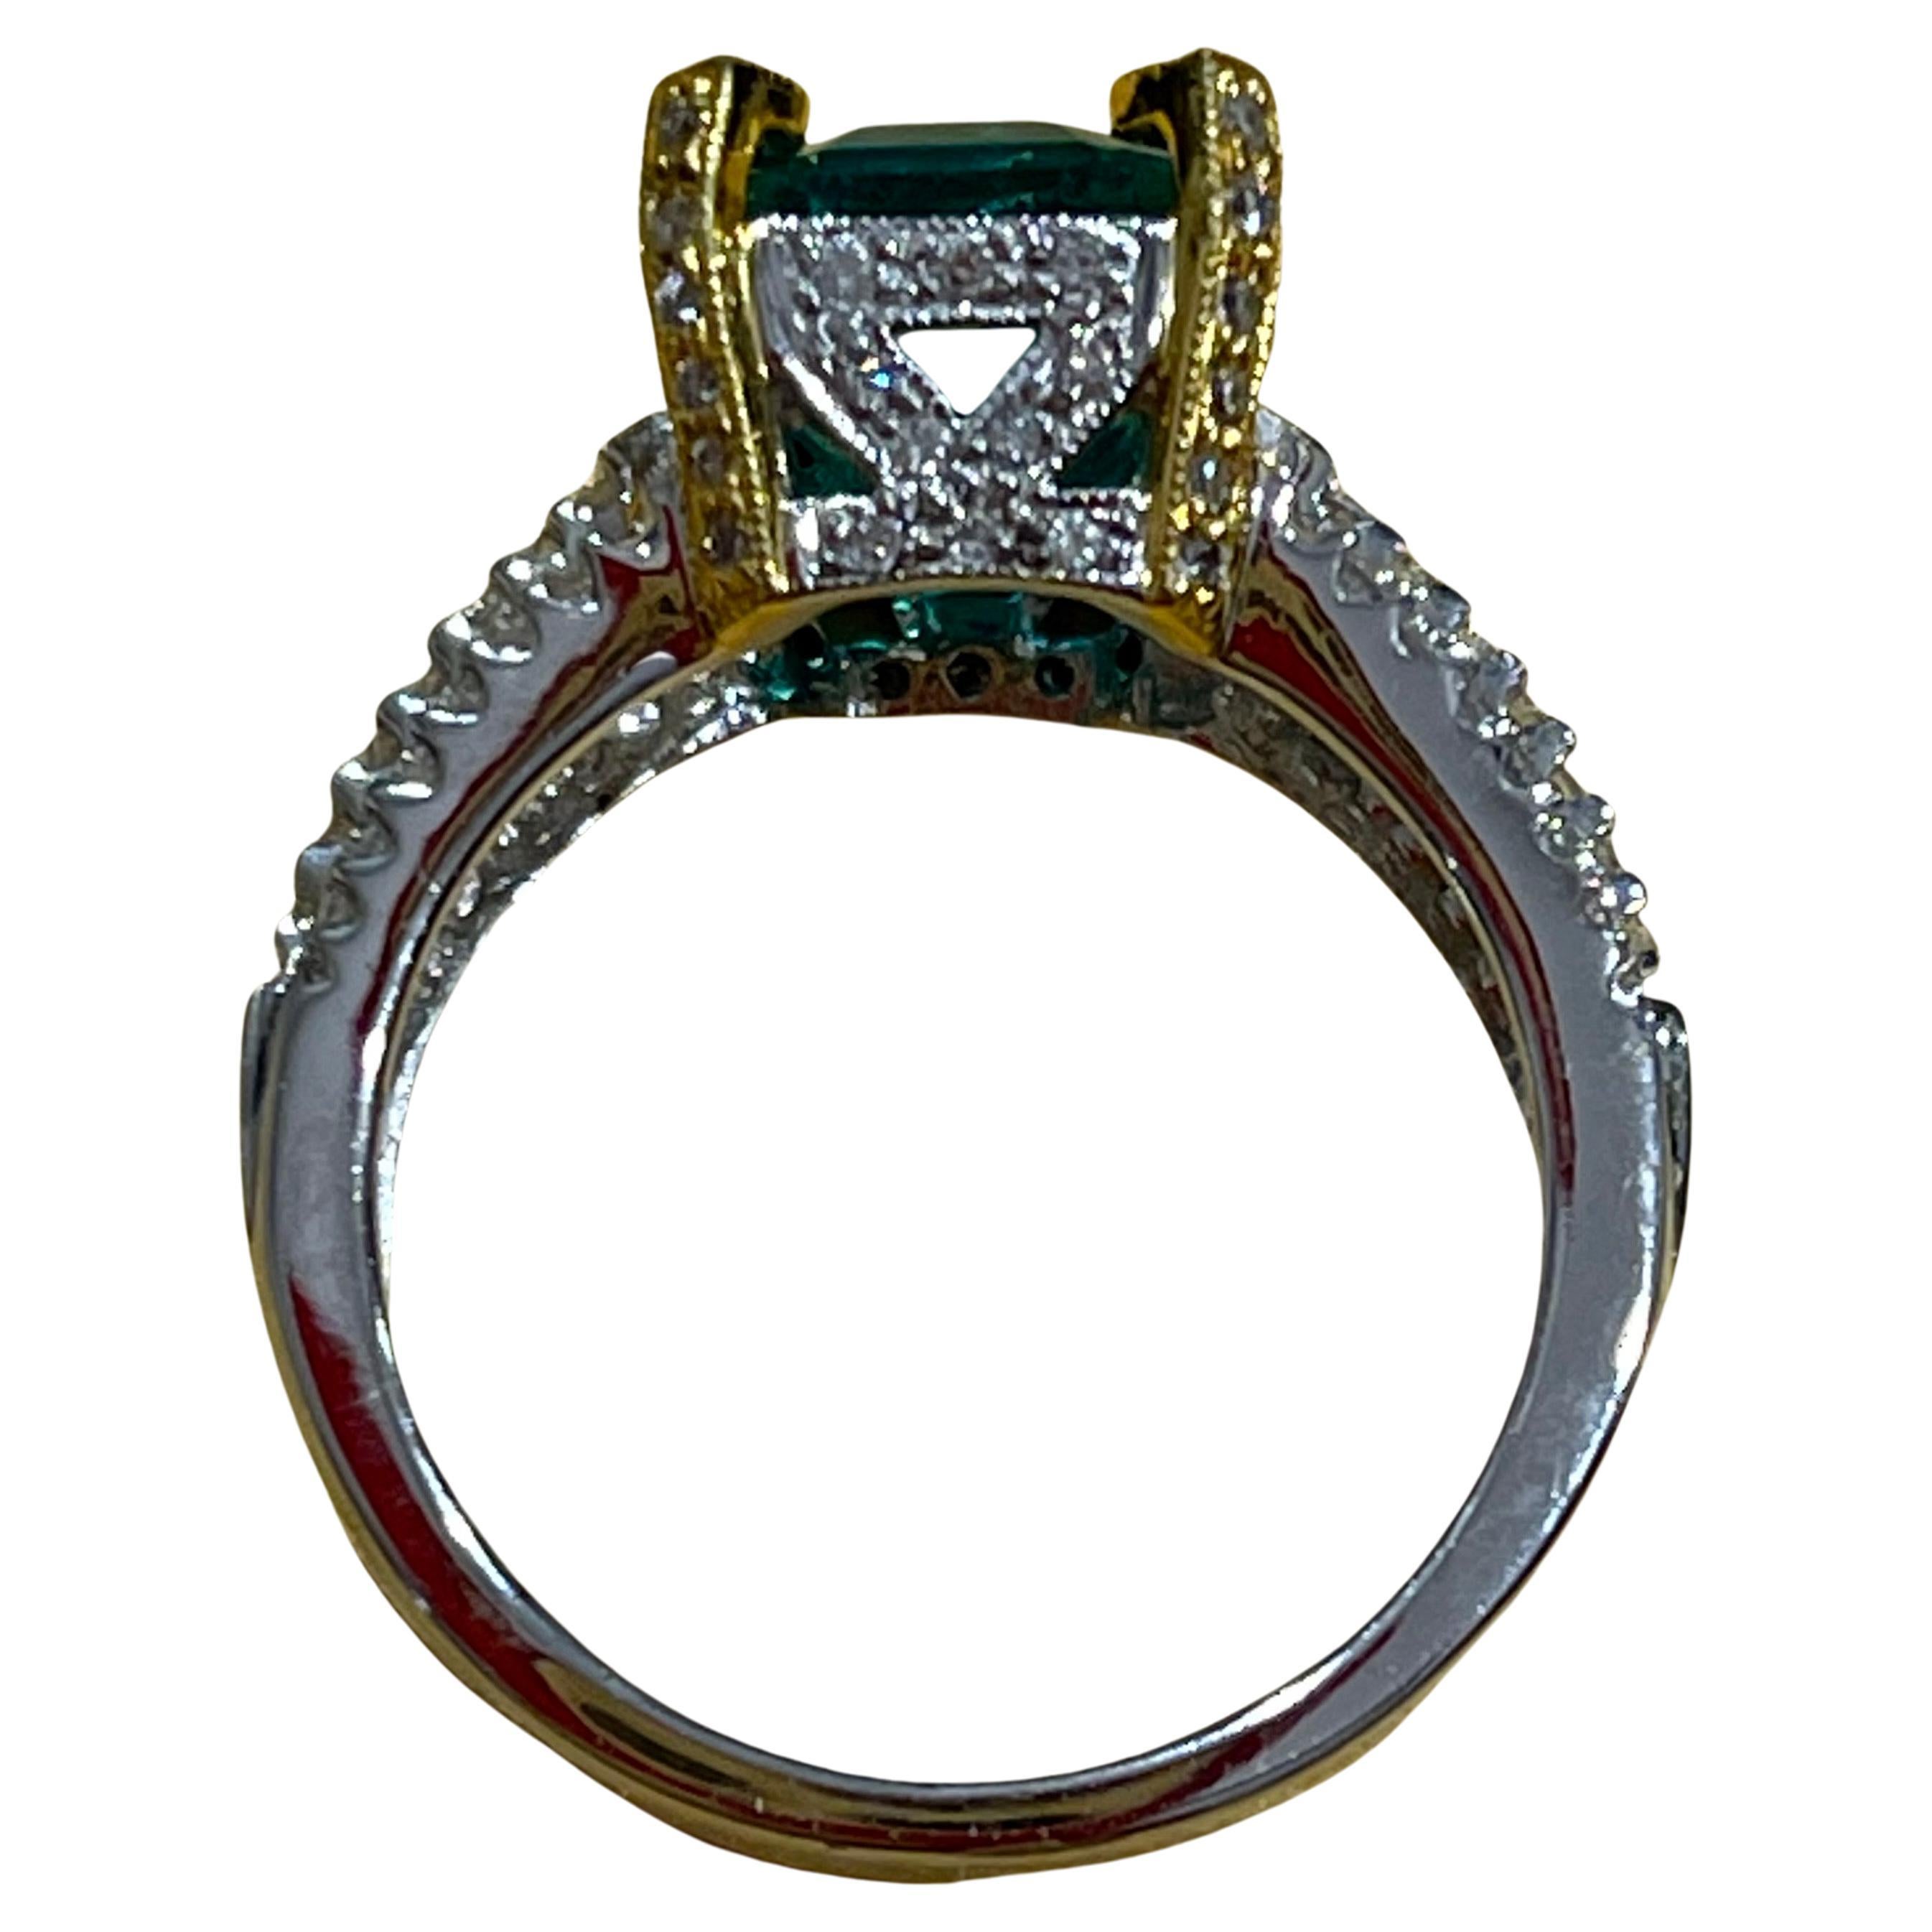 2.93 Carat Emerald Cut Colombian Emerald & 0.52Ct Diamond Ring 18K White/Y Gold In Excellent Condition For Sale In New York, NY